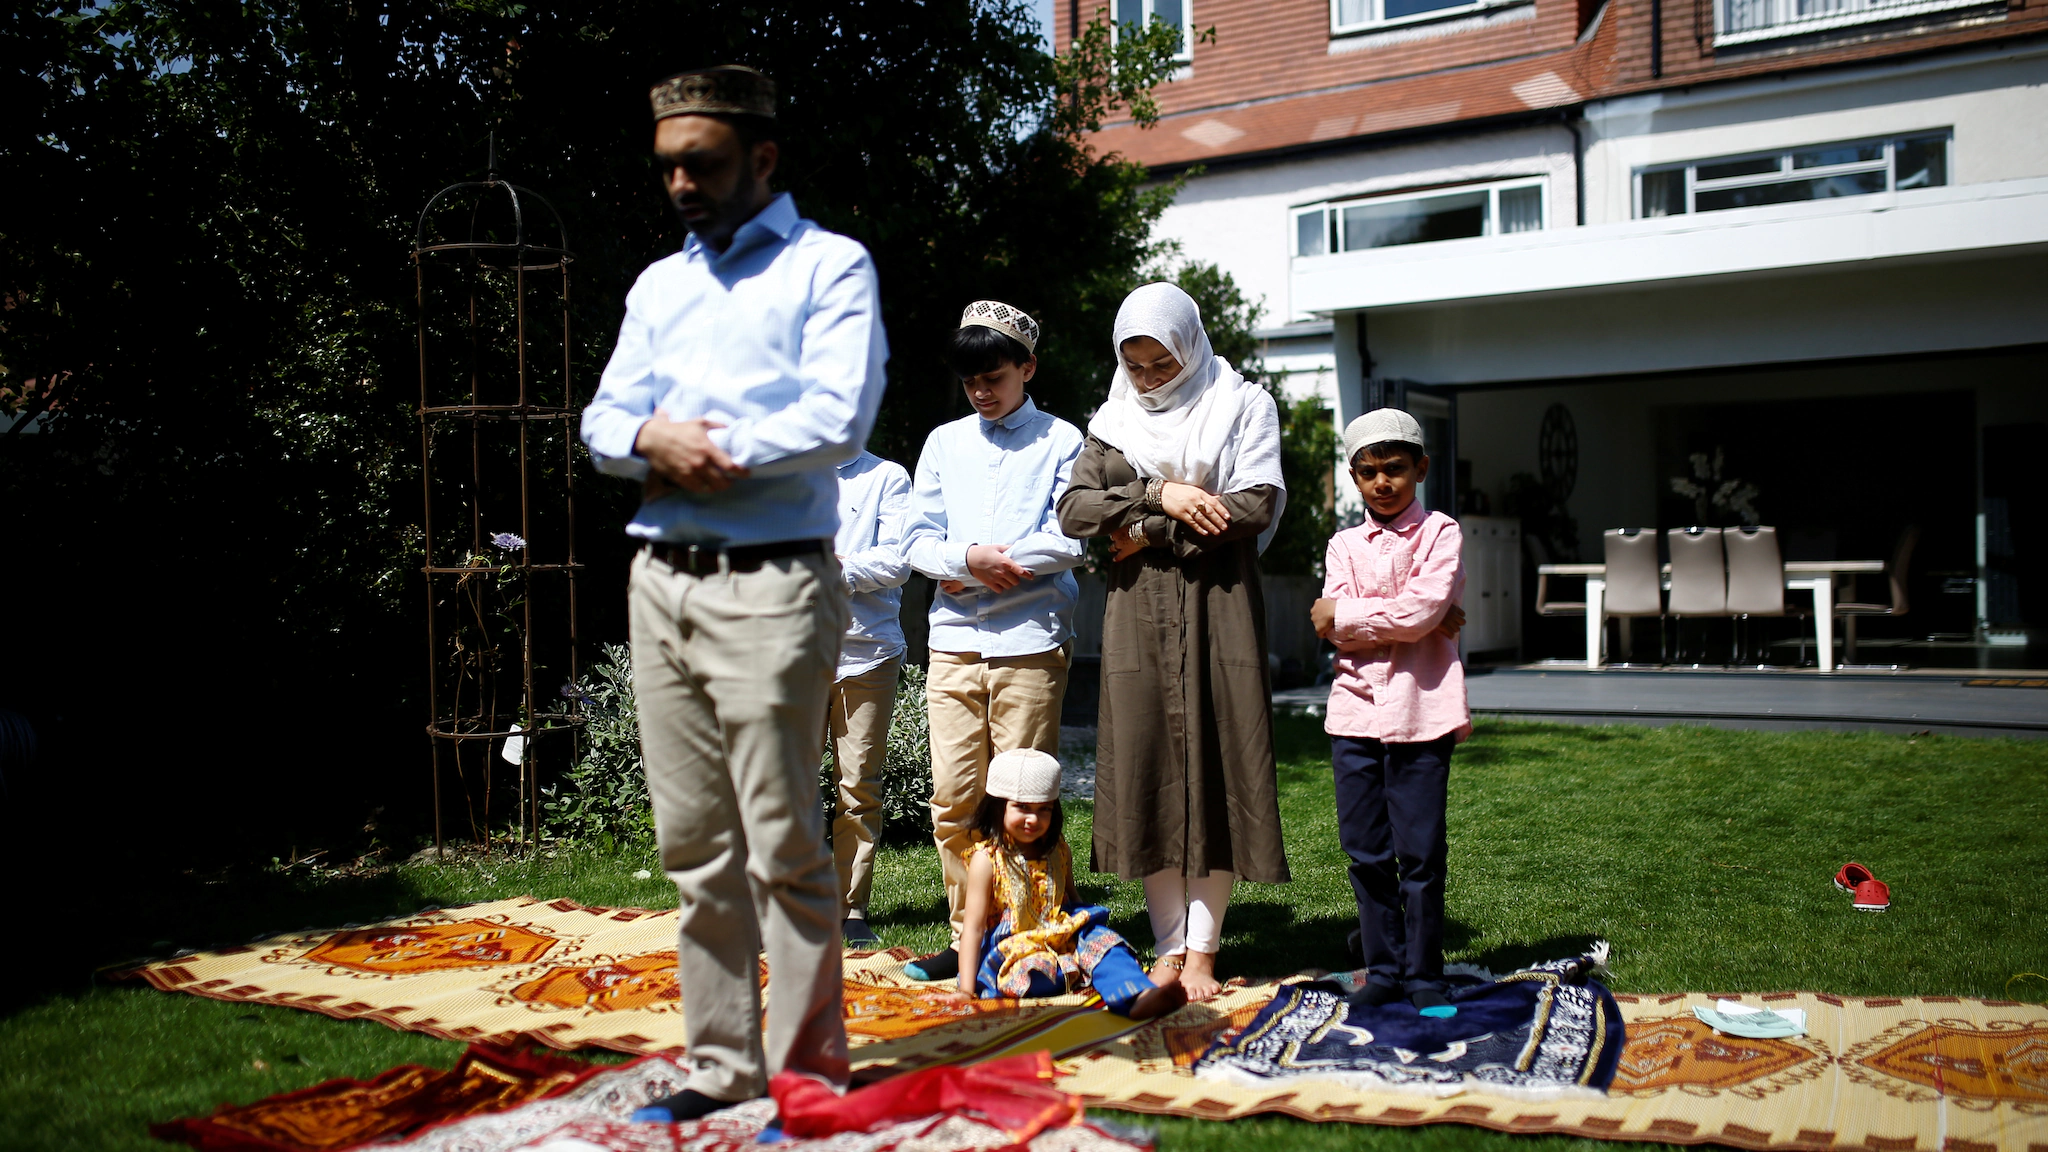 A family offer Eid al-Fitr prayers at home to mark the end of the month of Ramadan in Surbiton, London. [Image-REUTERS]